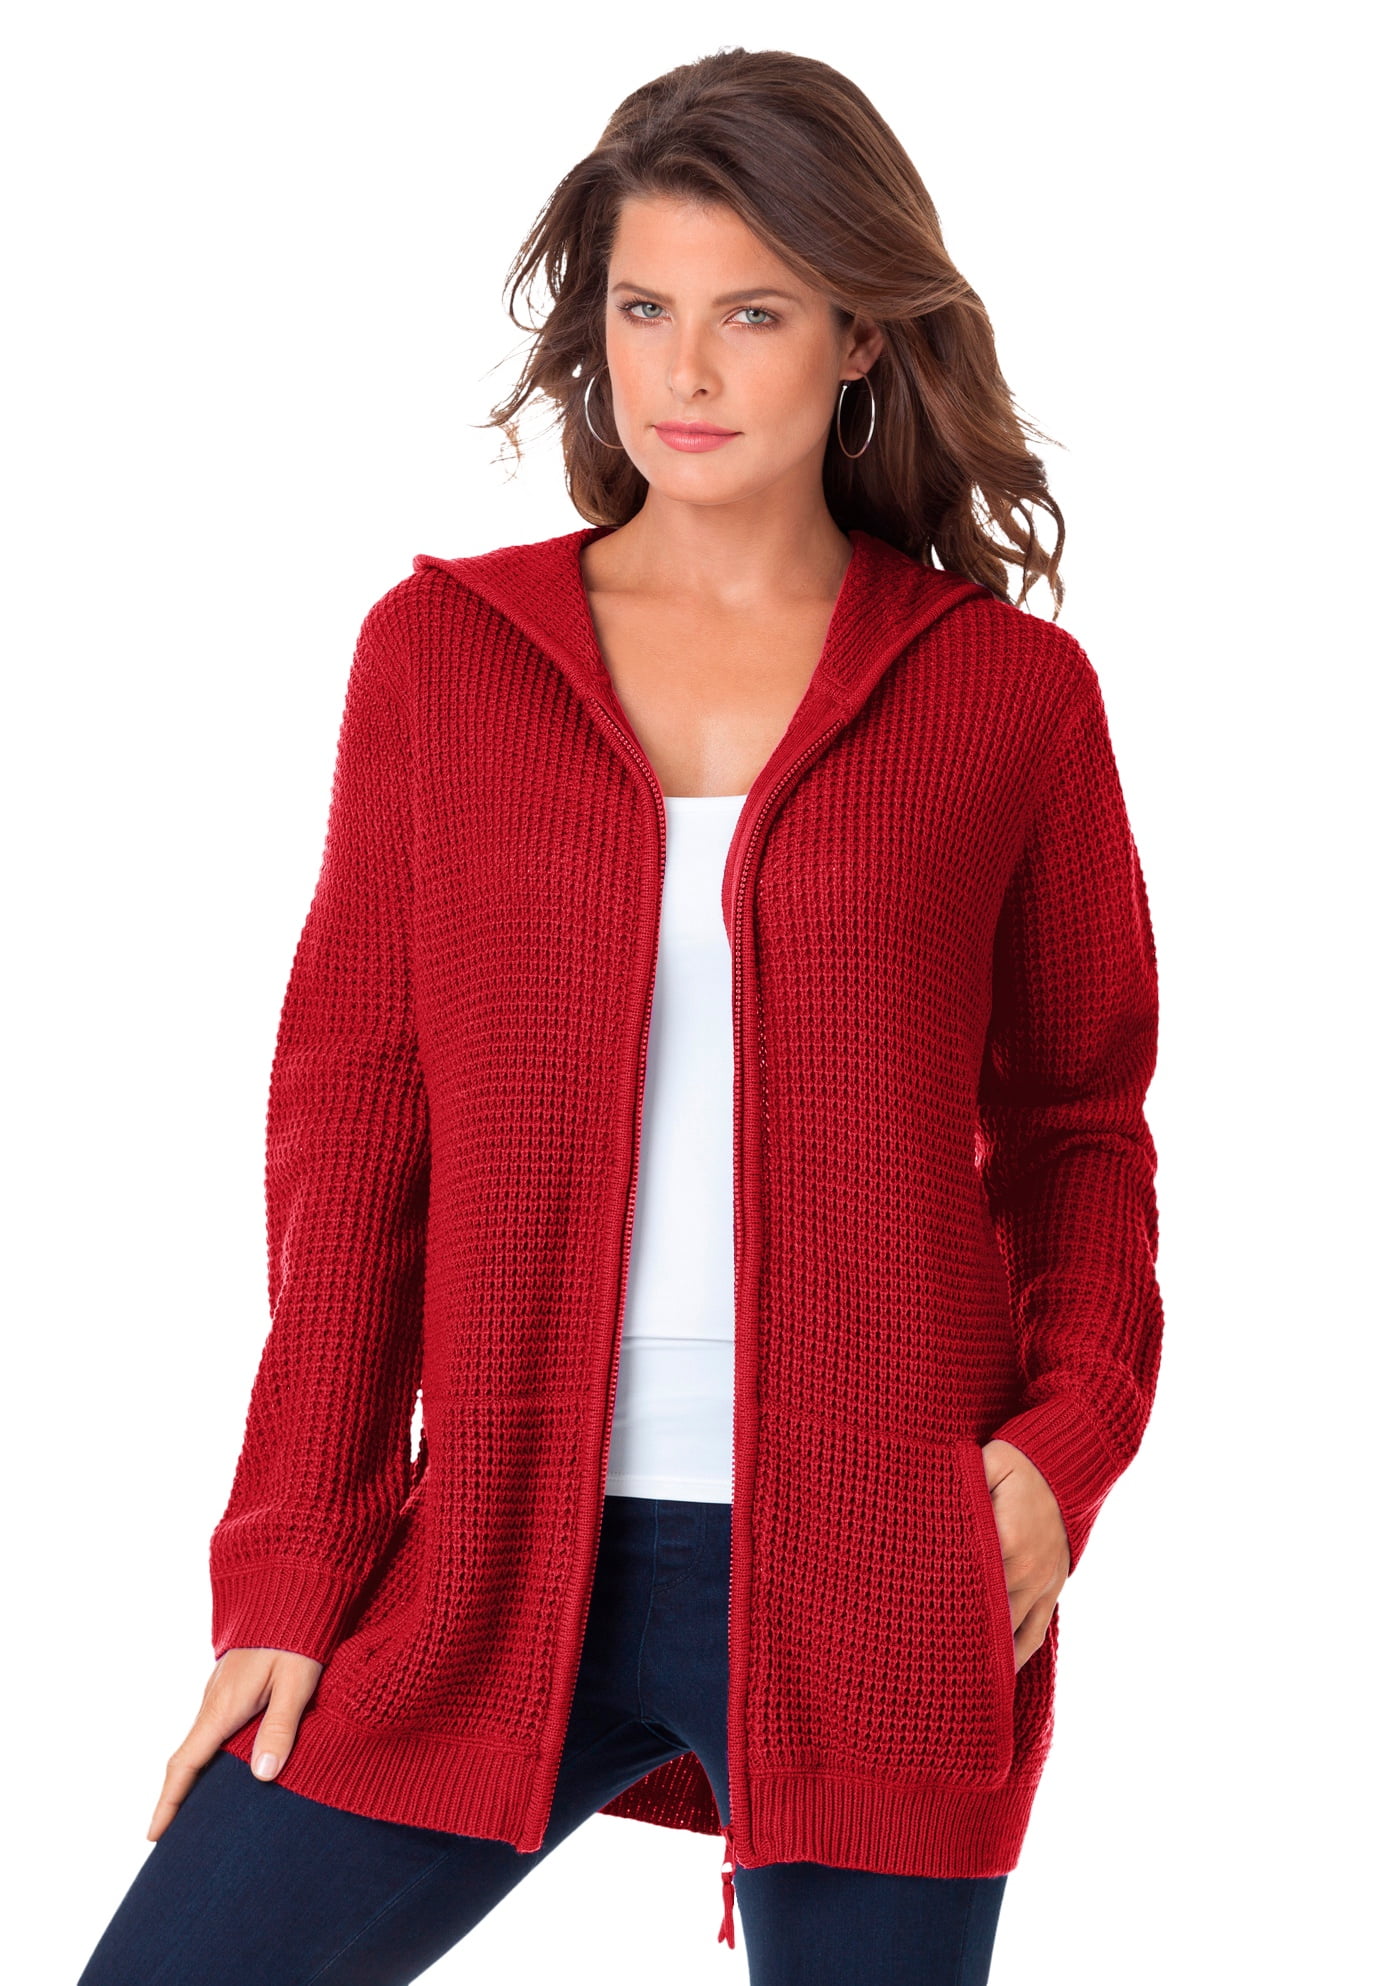 Many Distinct Categories of Sweaters for Women | Pearltrees